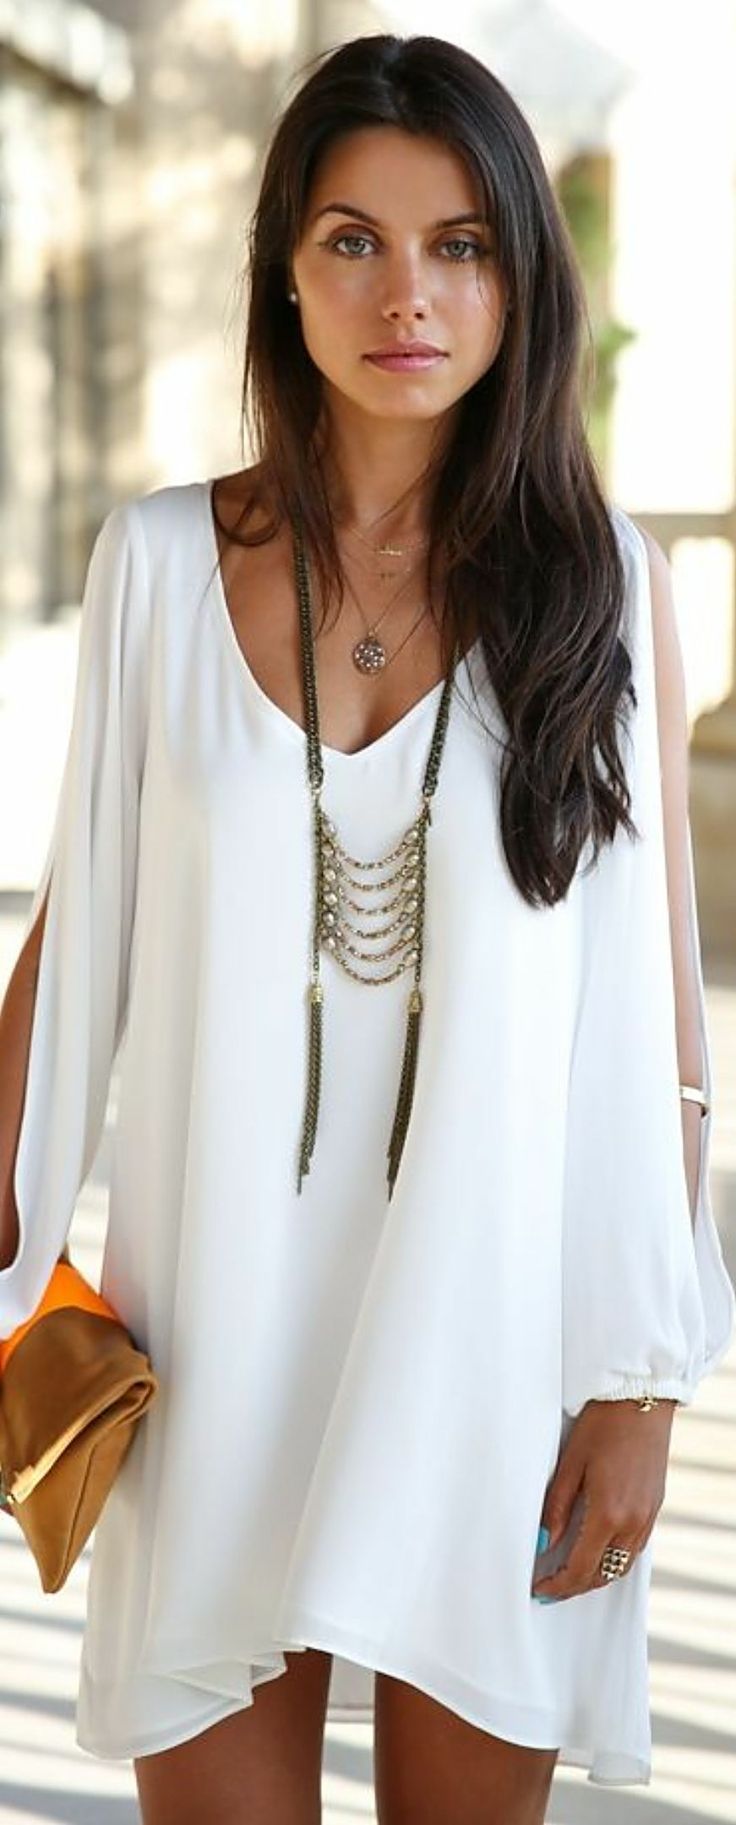 OOOH I love this! So easy and stylish. Perfect for summer! Lovely white mini boh